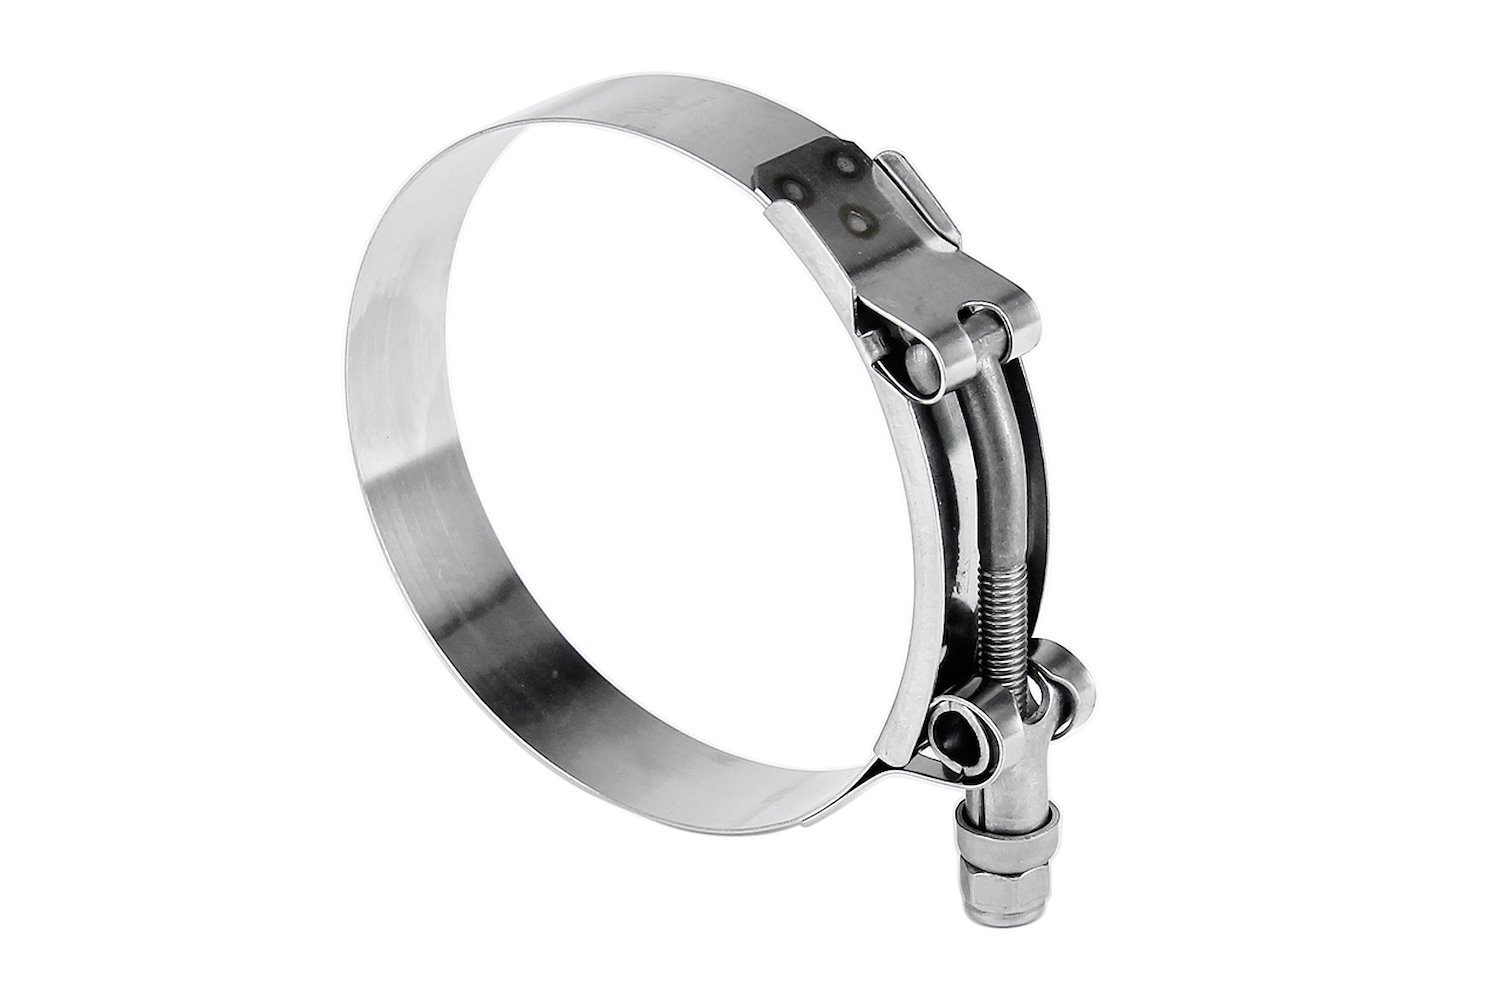 316-SSTC-146-154 100-Percent Marine Grade Stainless Steel T-Bolt Hose Clamp, Size #156, Range: 5.75 in.- 6.06 in.